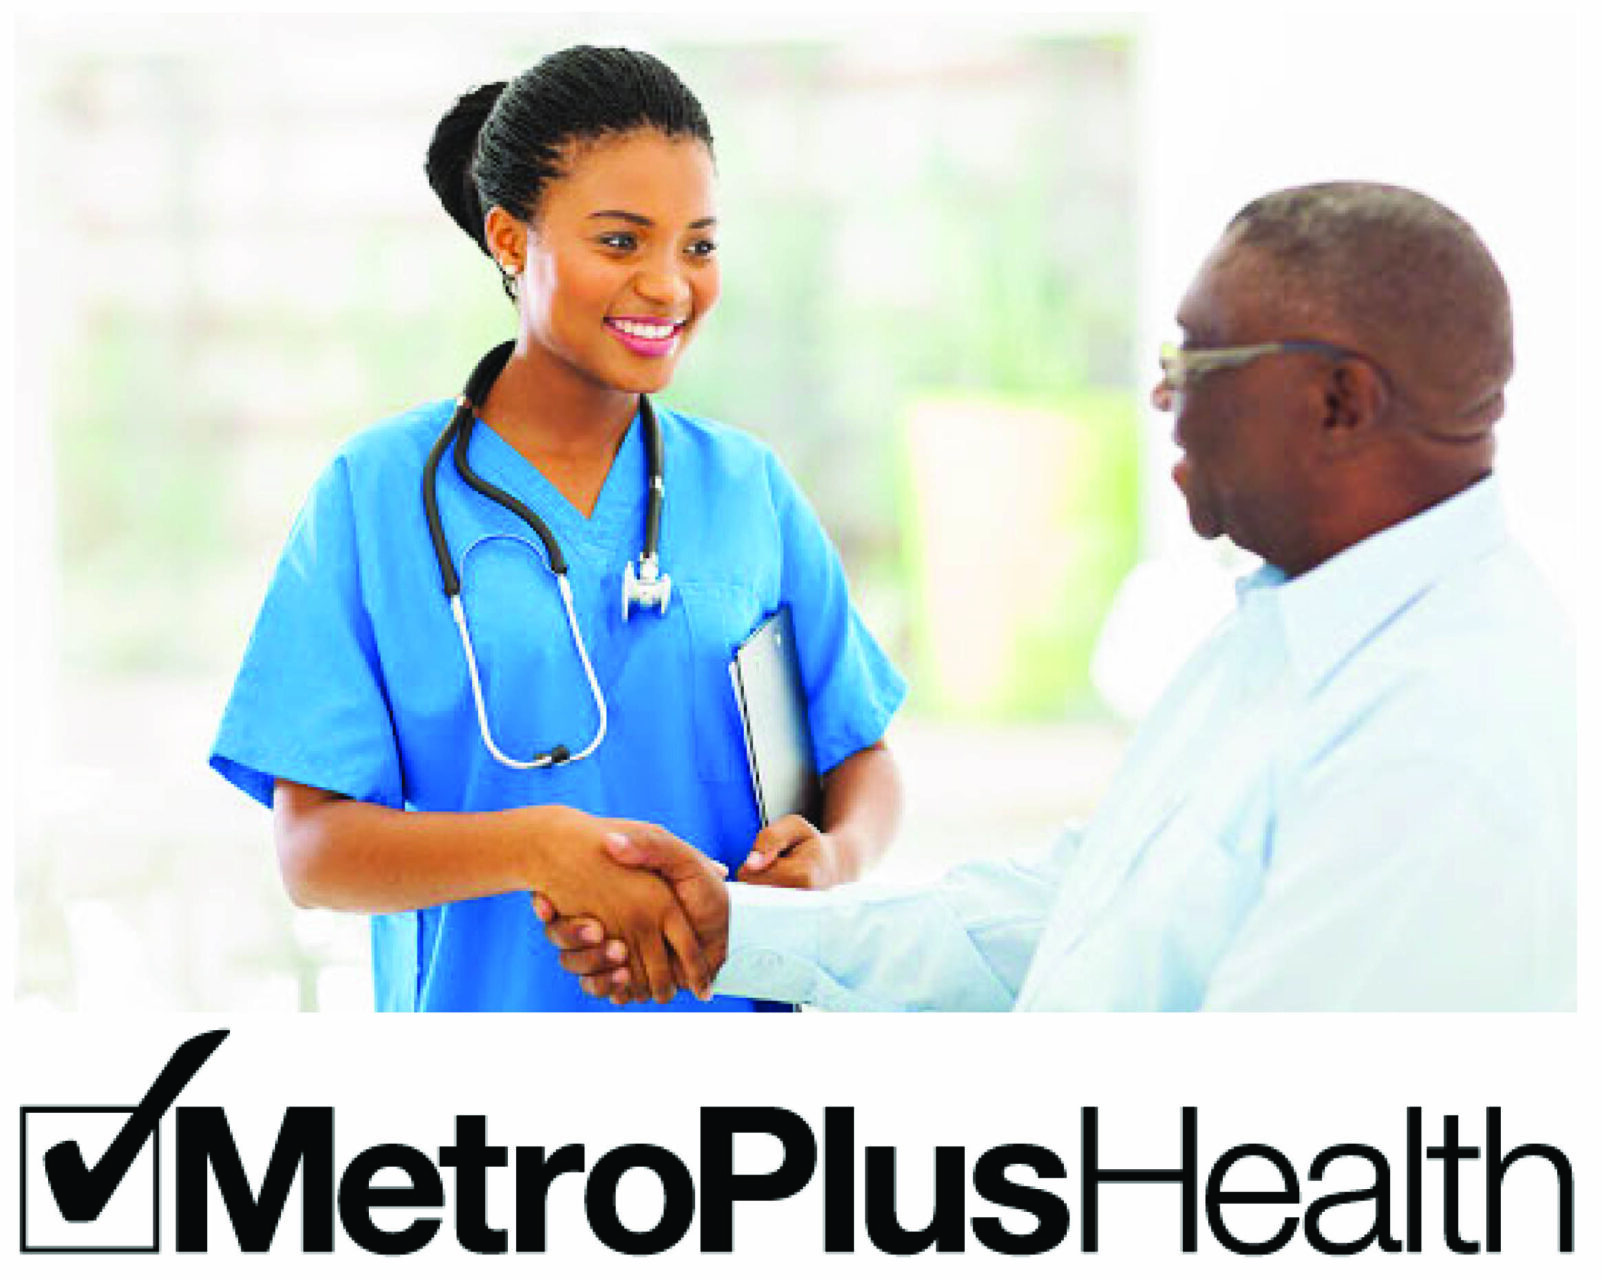 Metroplus Health picture of nurse and patient